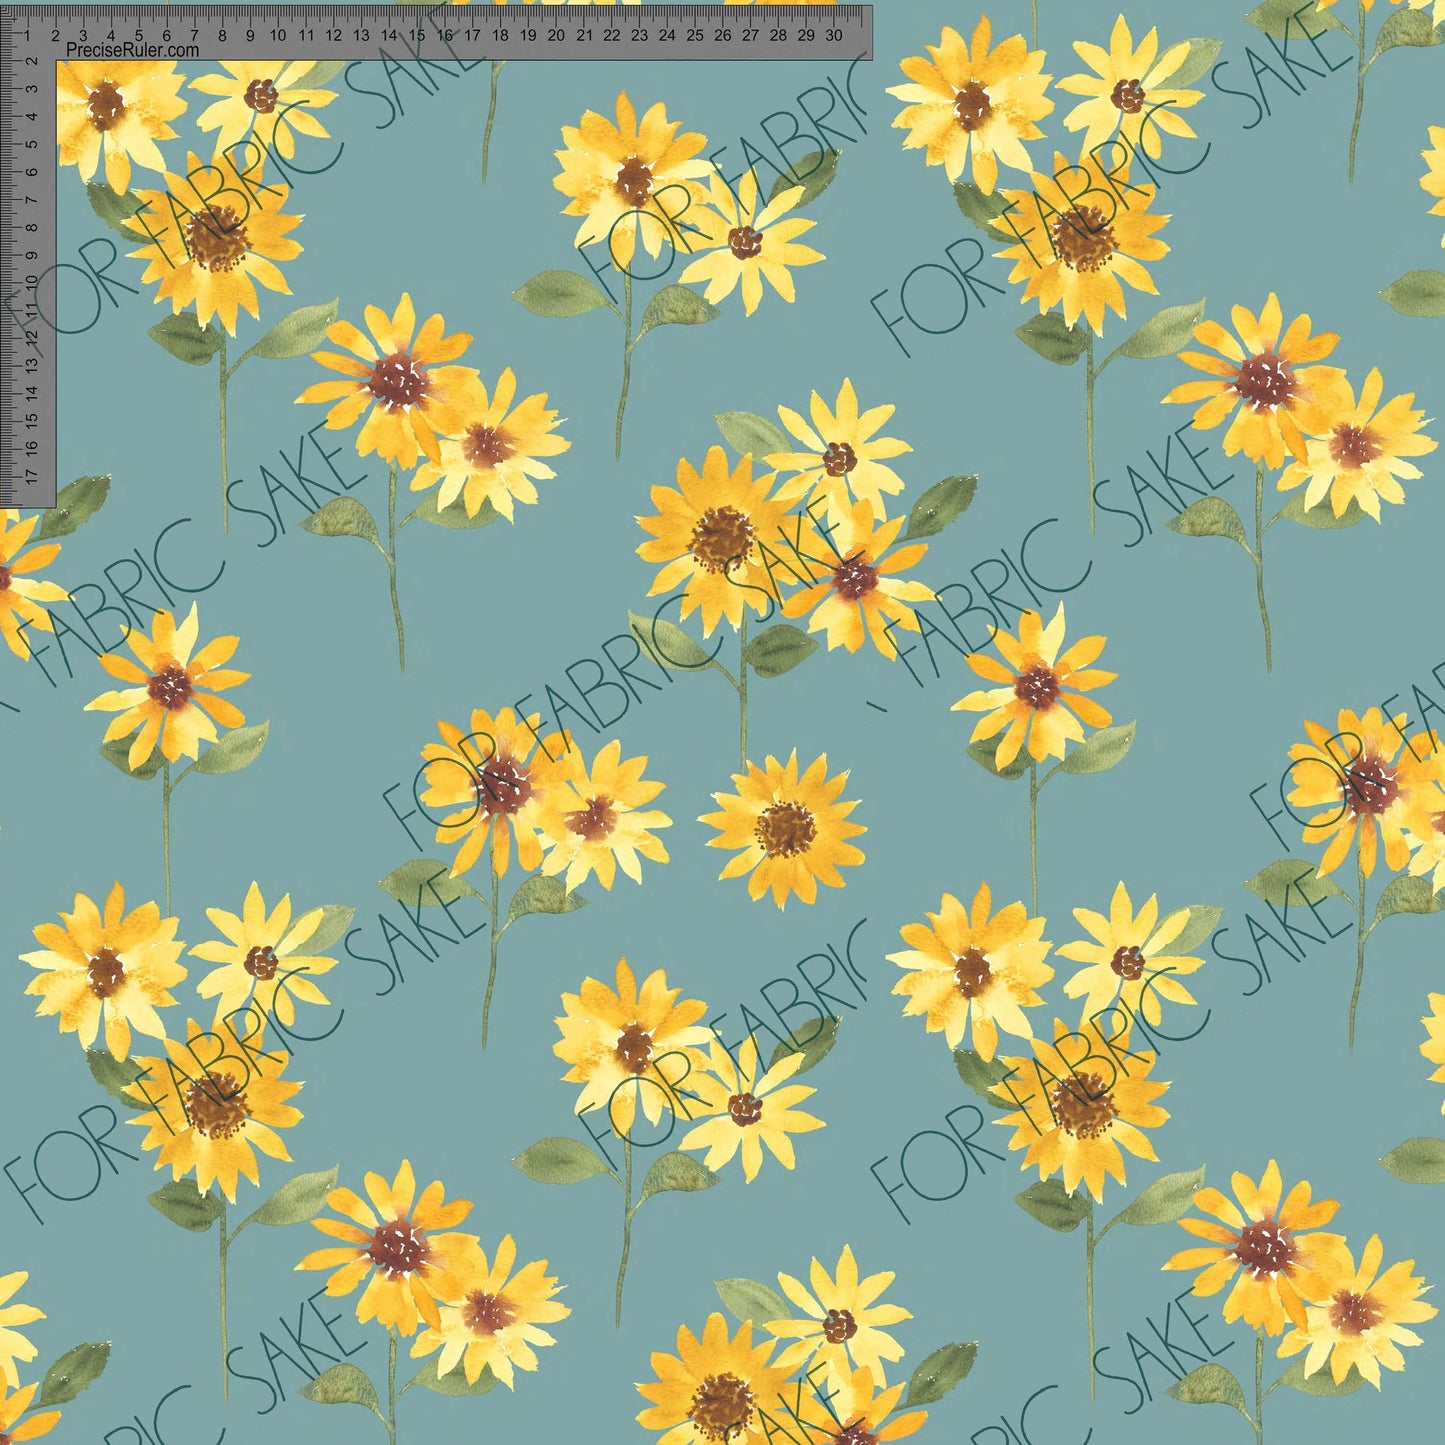 Load image into Gallery viewer, Sunflowers on dusty mint - Ashleigh Fish - Custom Pre Order
